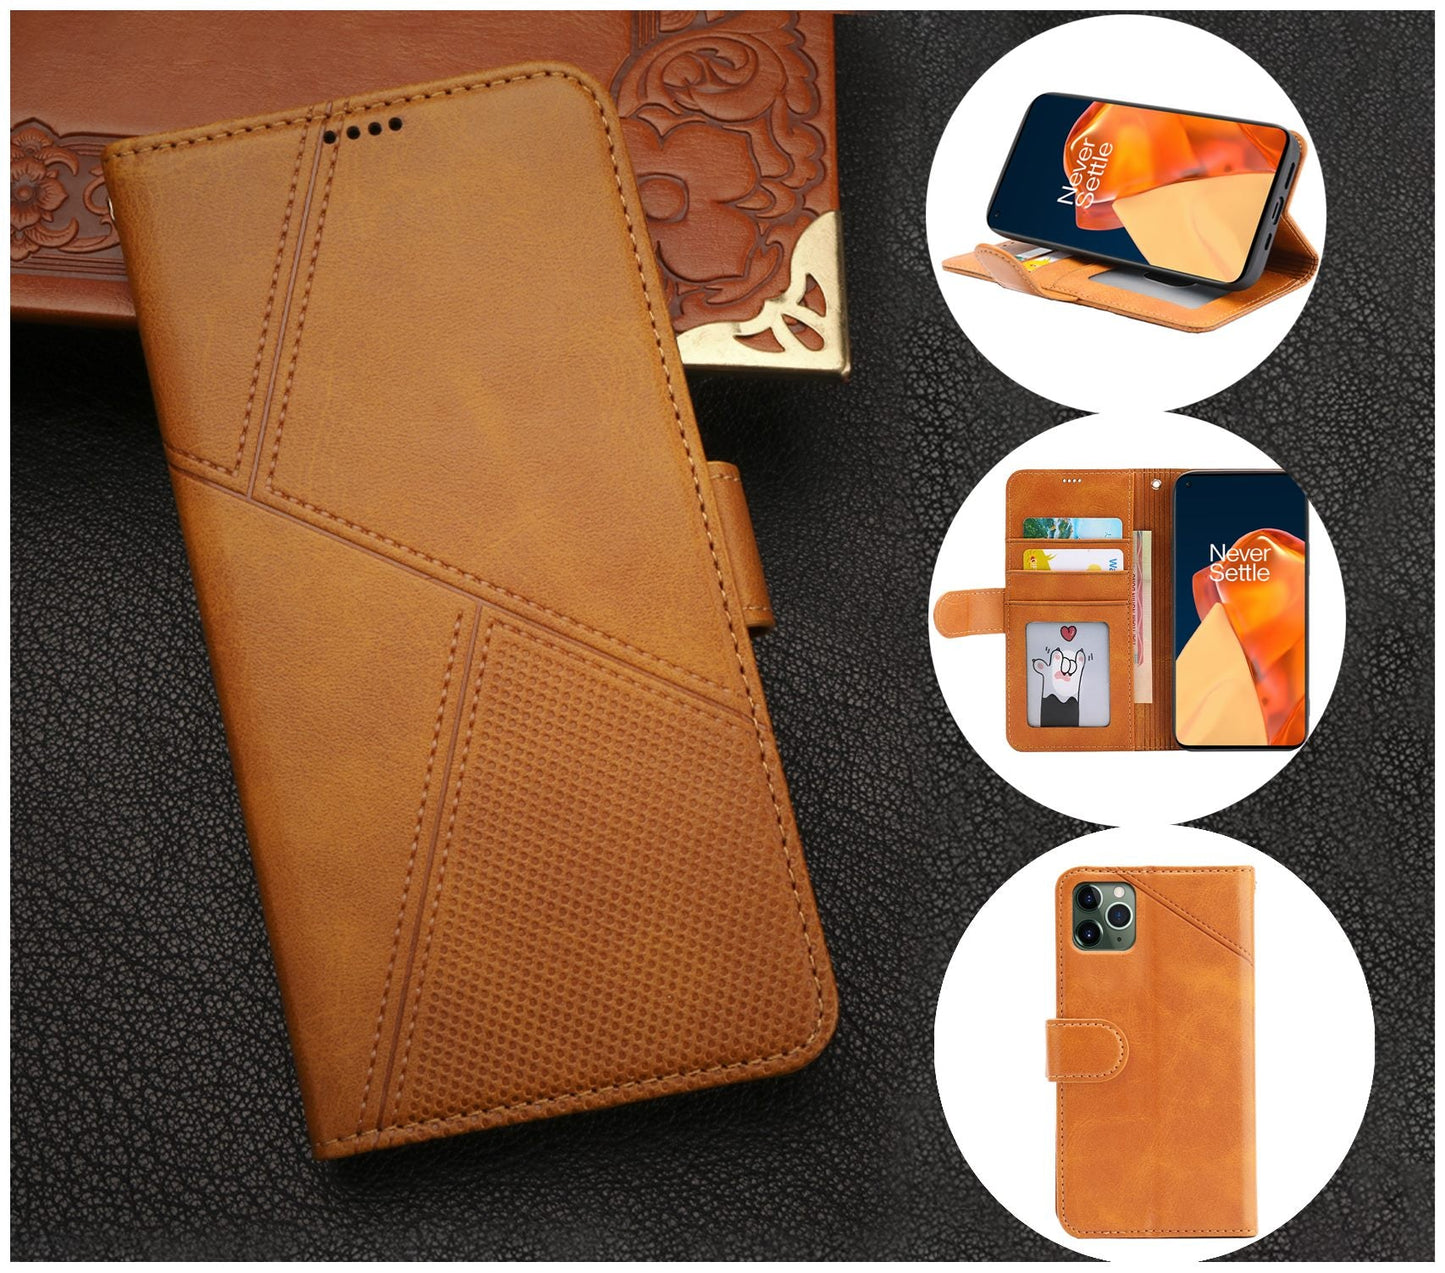 iPhone 11 Pro Max Case Wallet Cover Orange Yellow